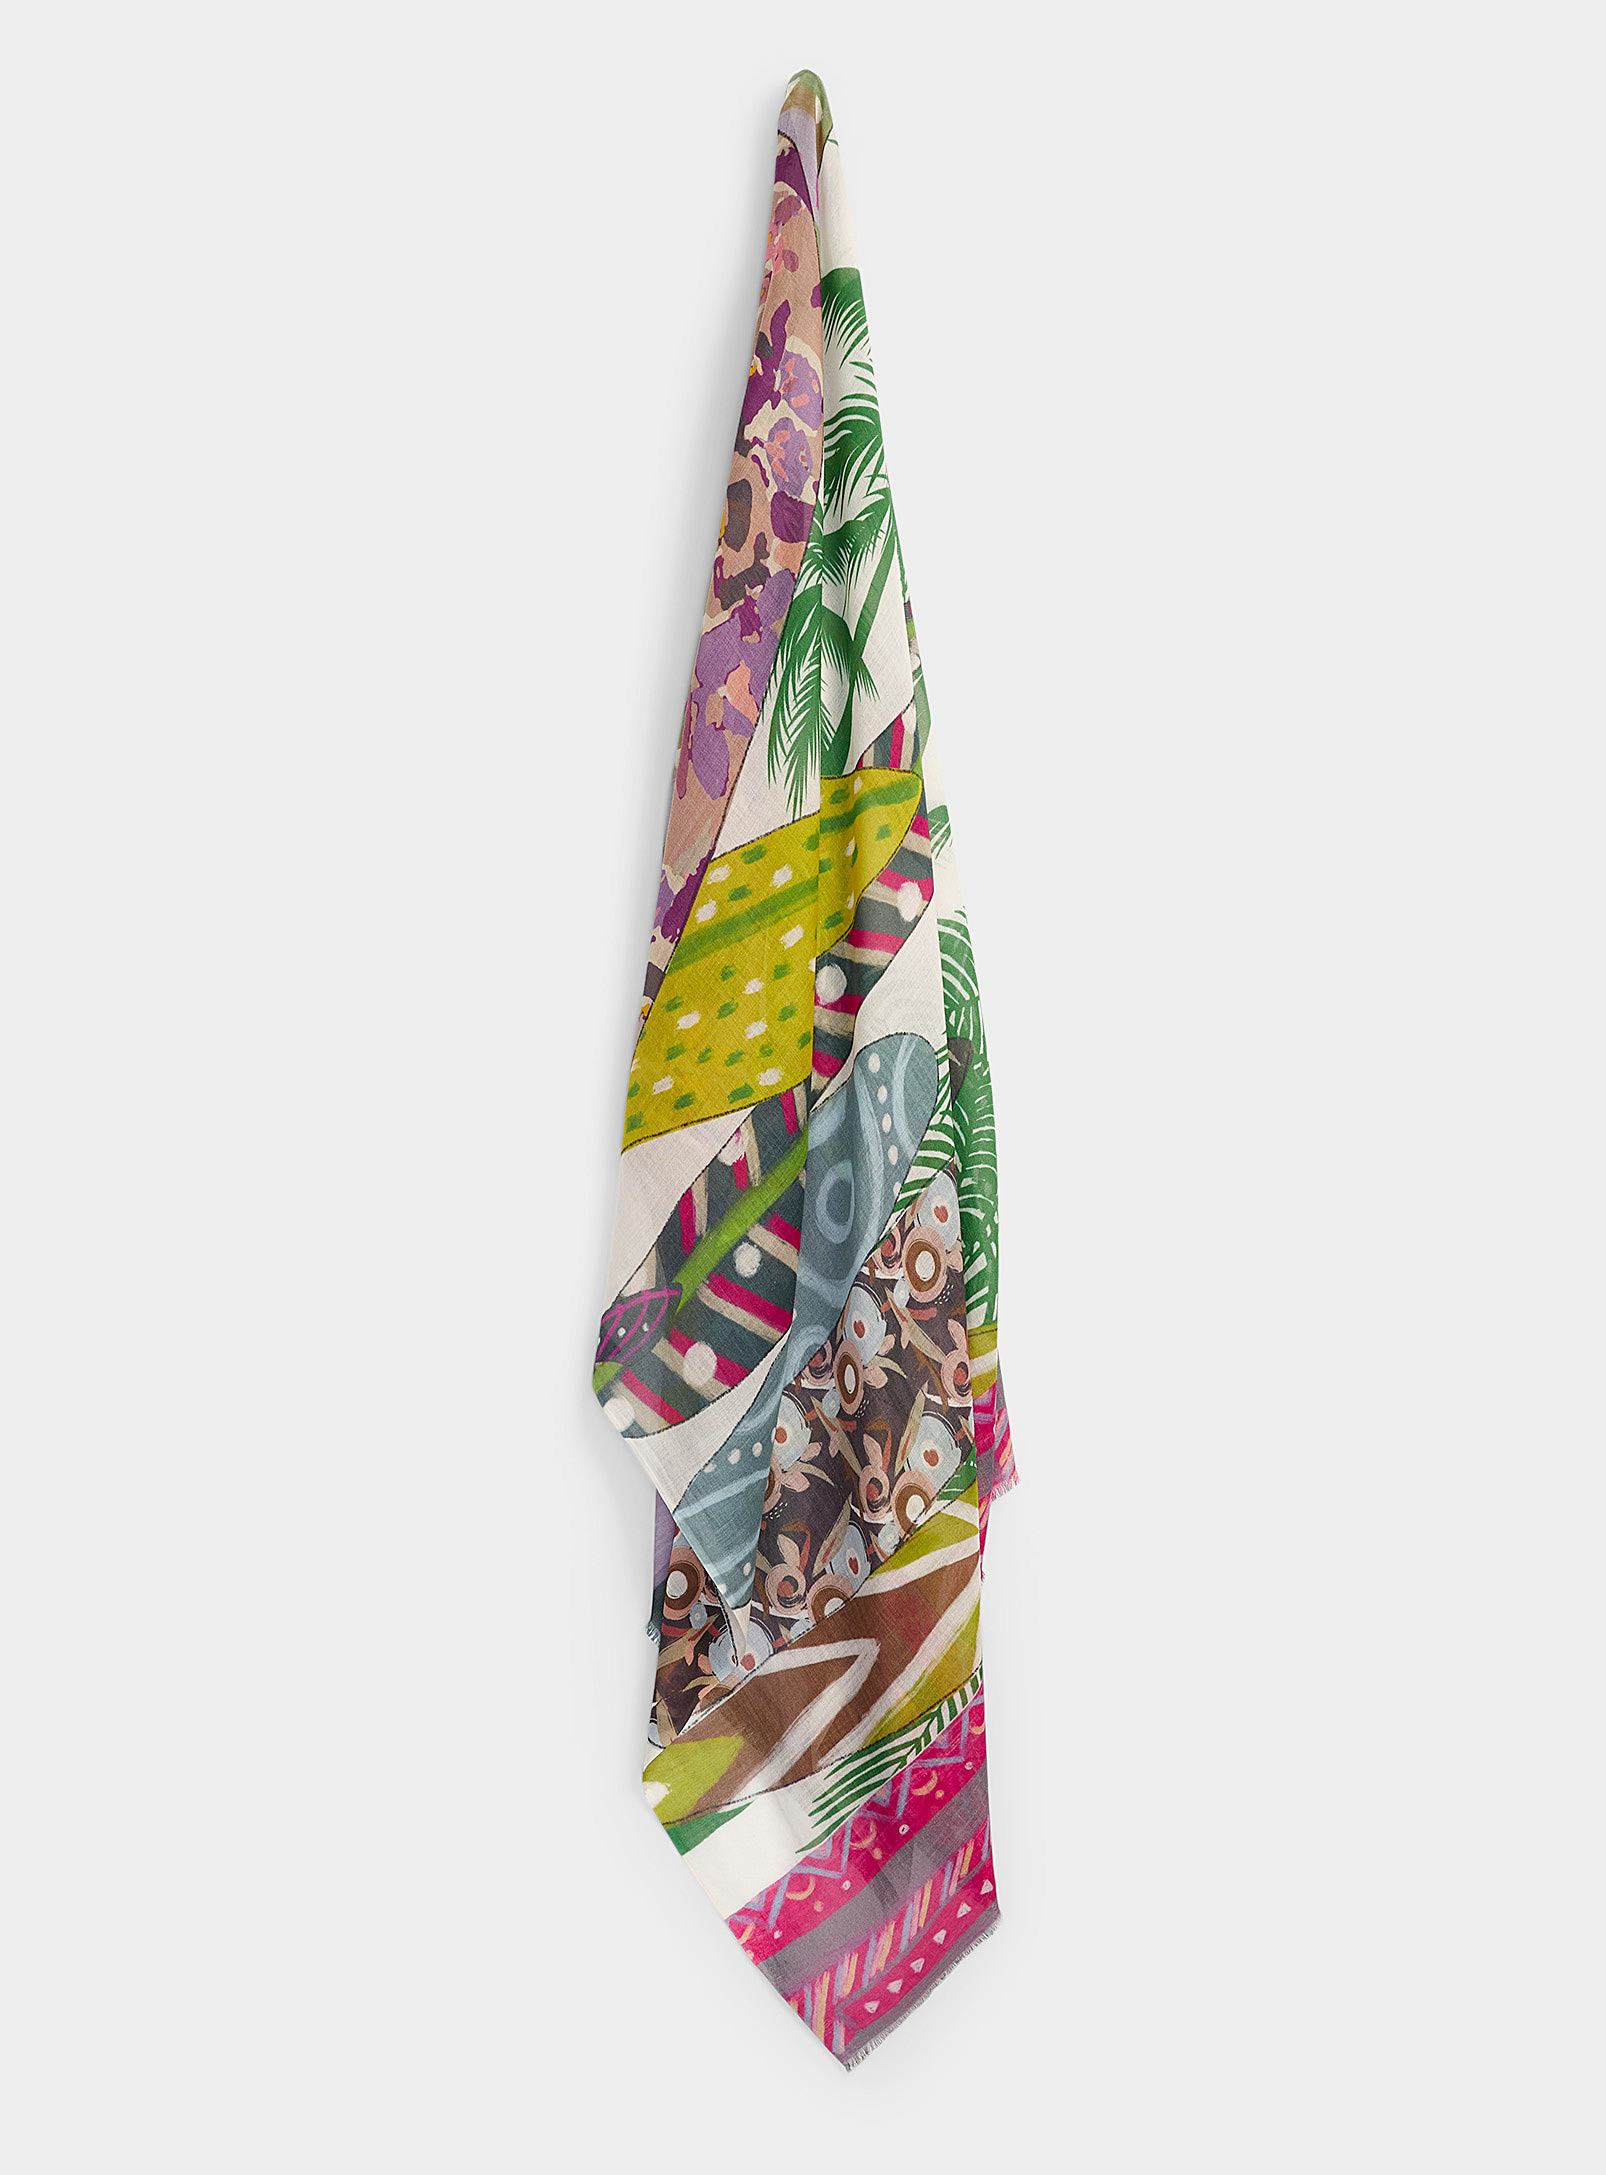 Storiatipic Beach Vacation Lightweight Scarf In Patterned Green